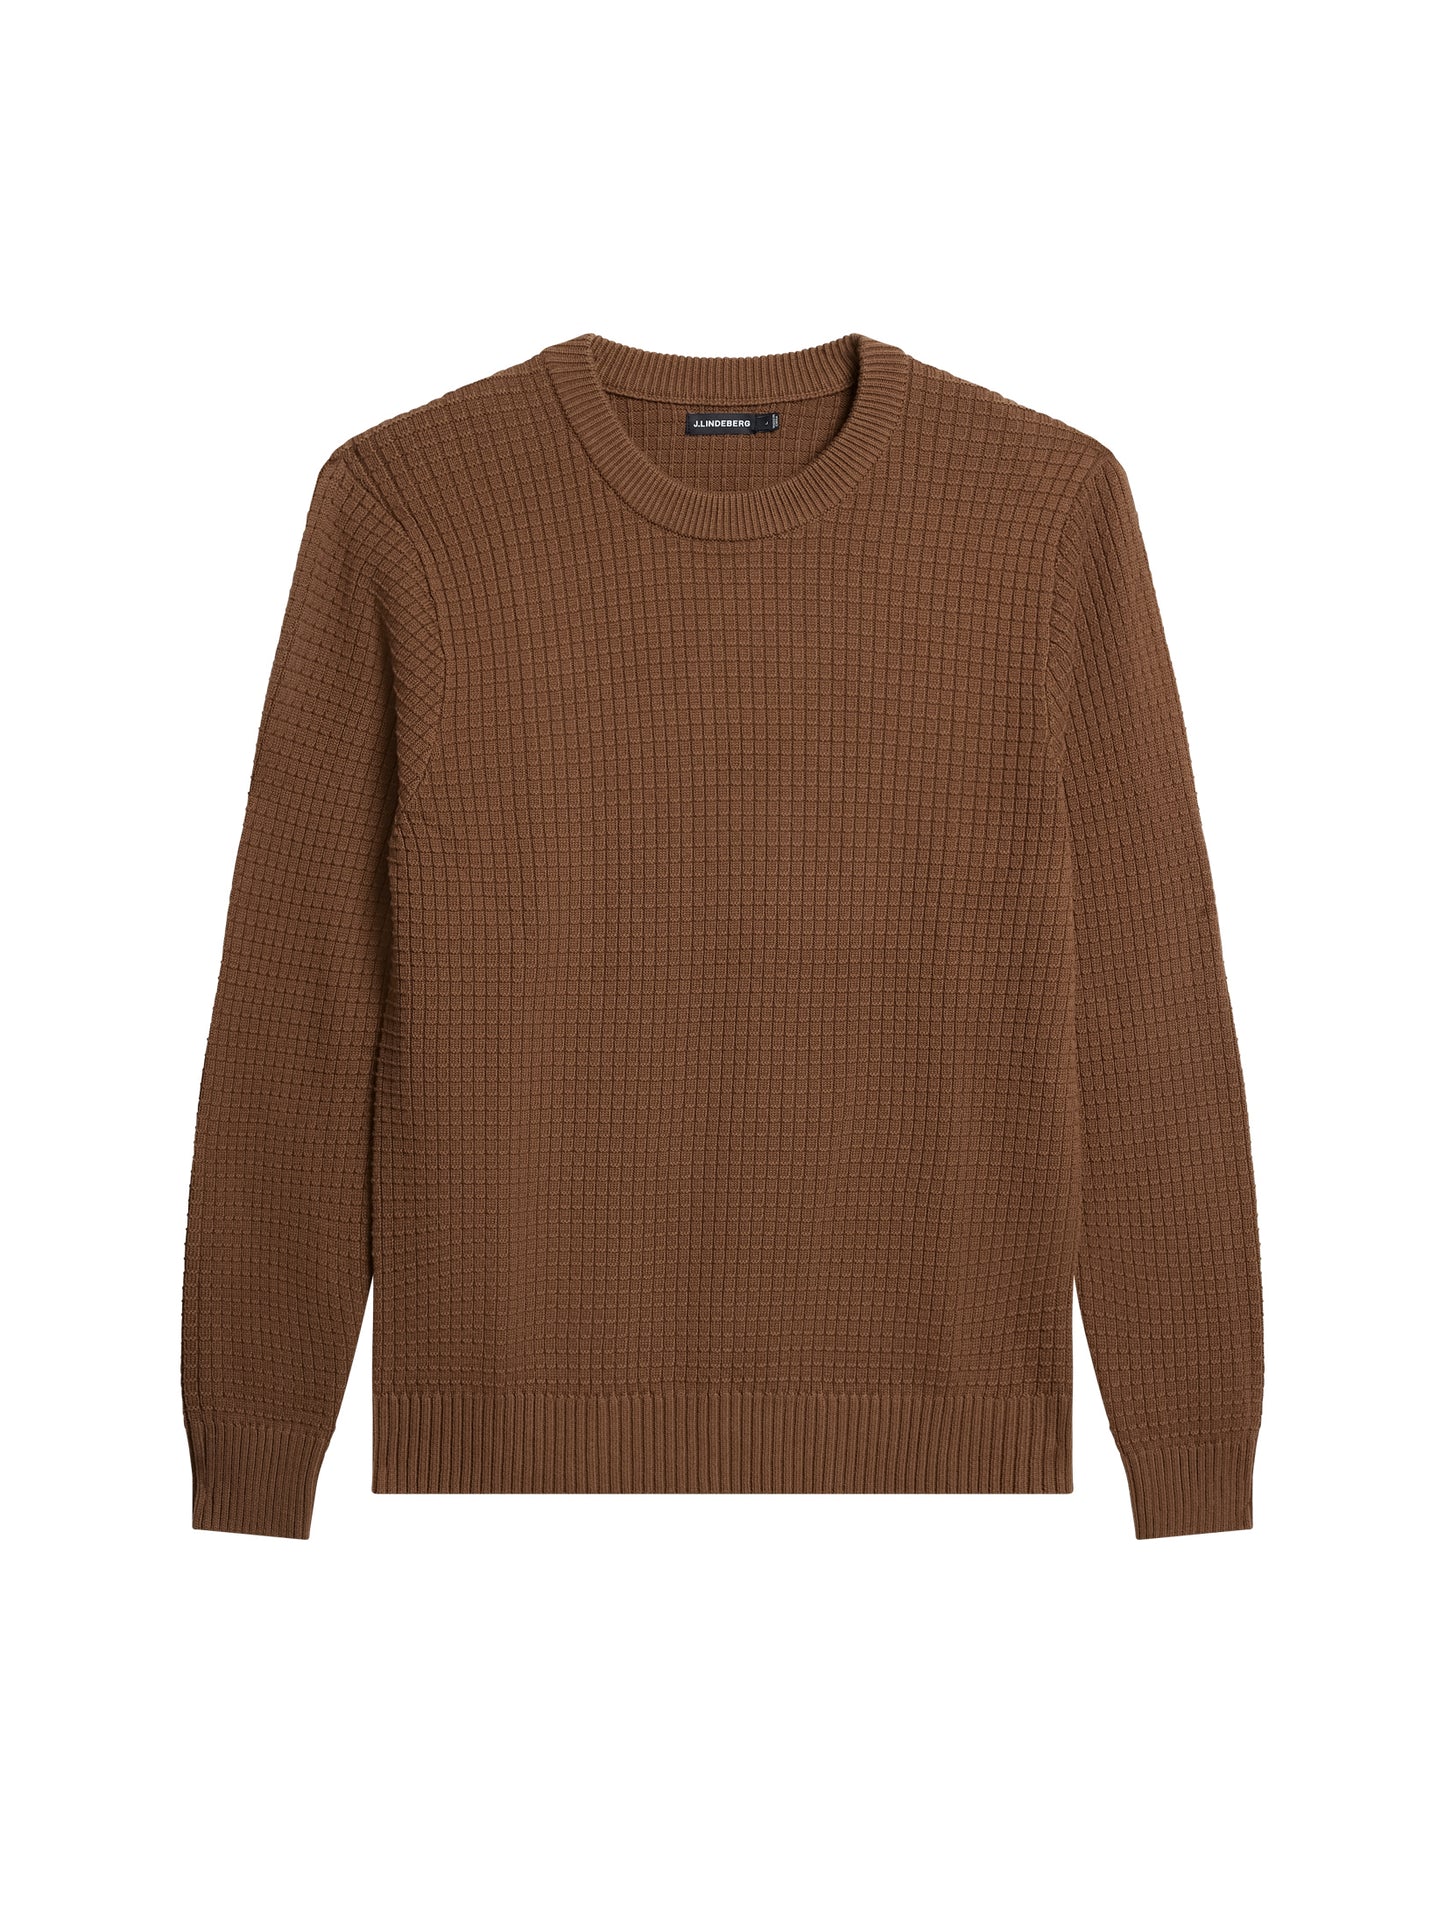 Archer Structure Sweater / Canuto – J.Lindeberg